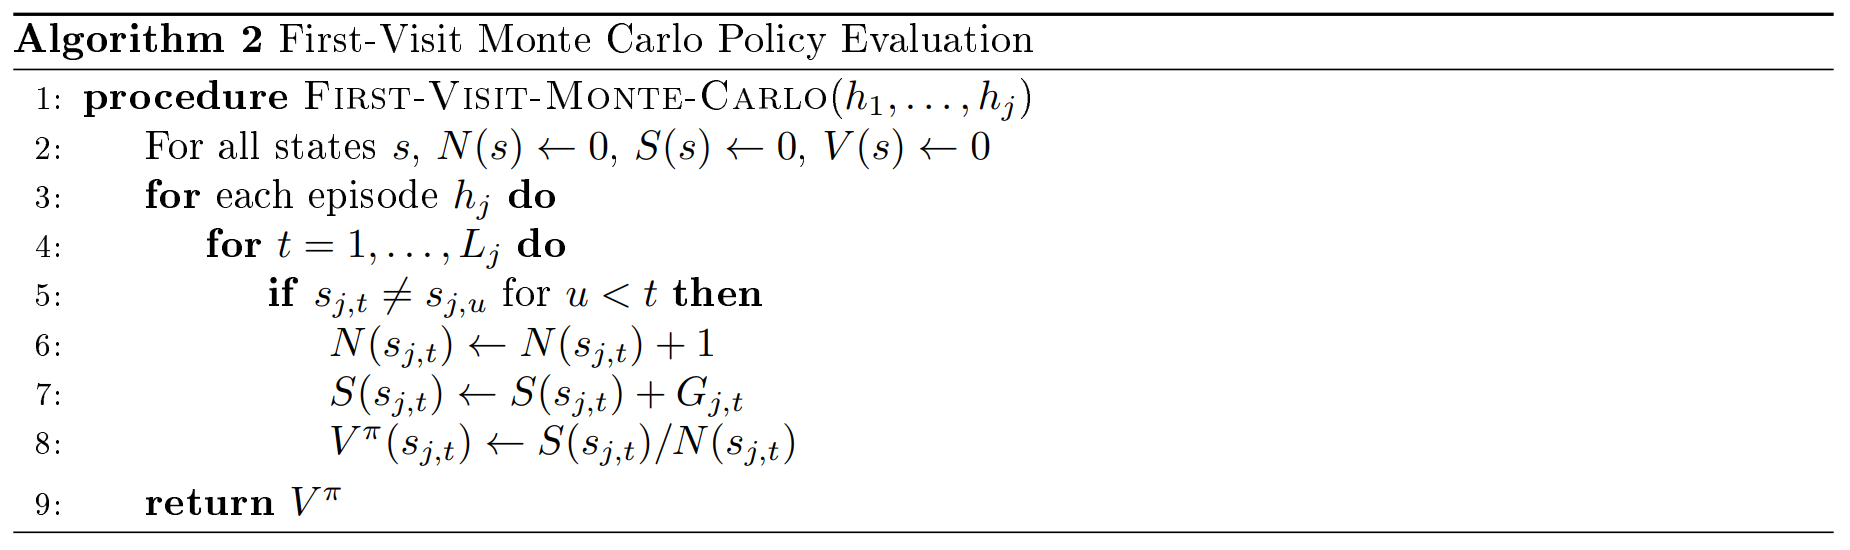 docs/stanford-cs234-notes-zh/img/fig3_alg_2.png